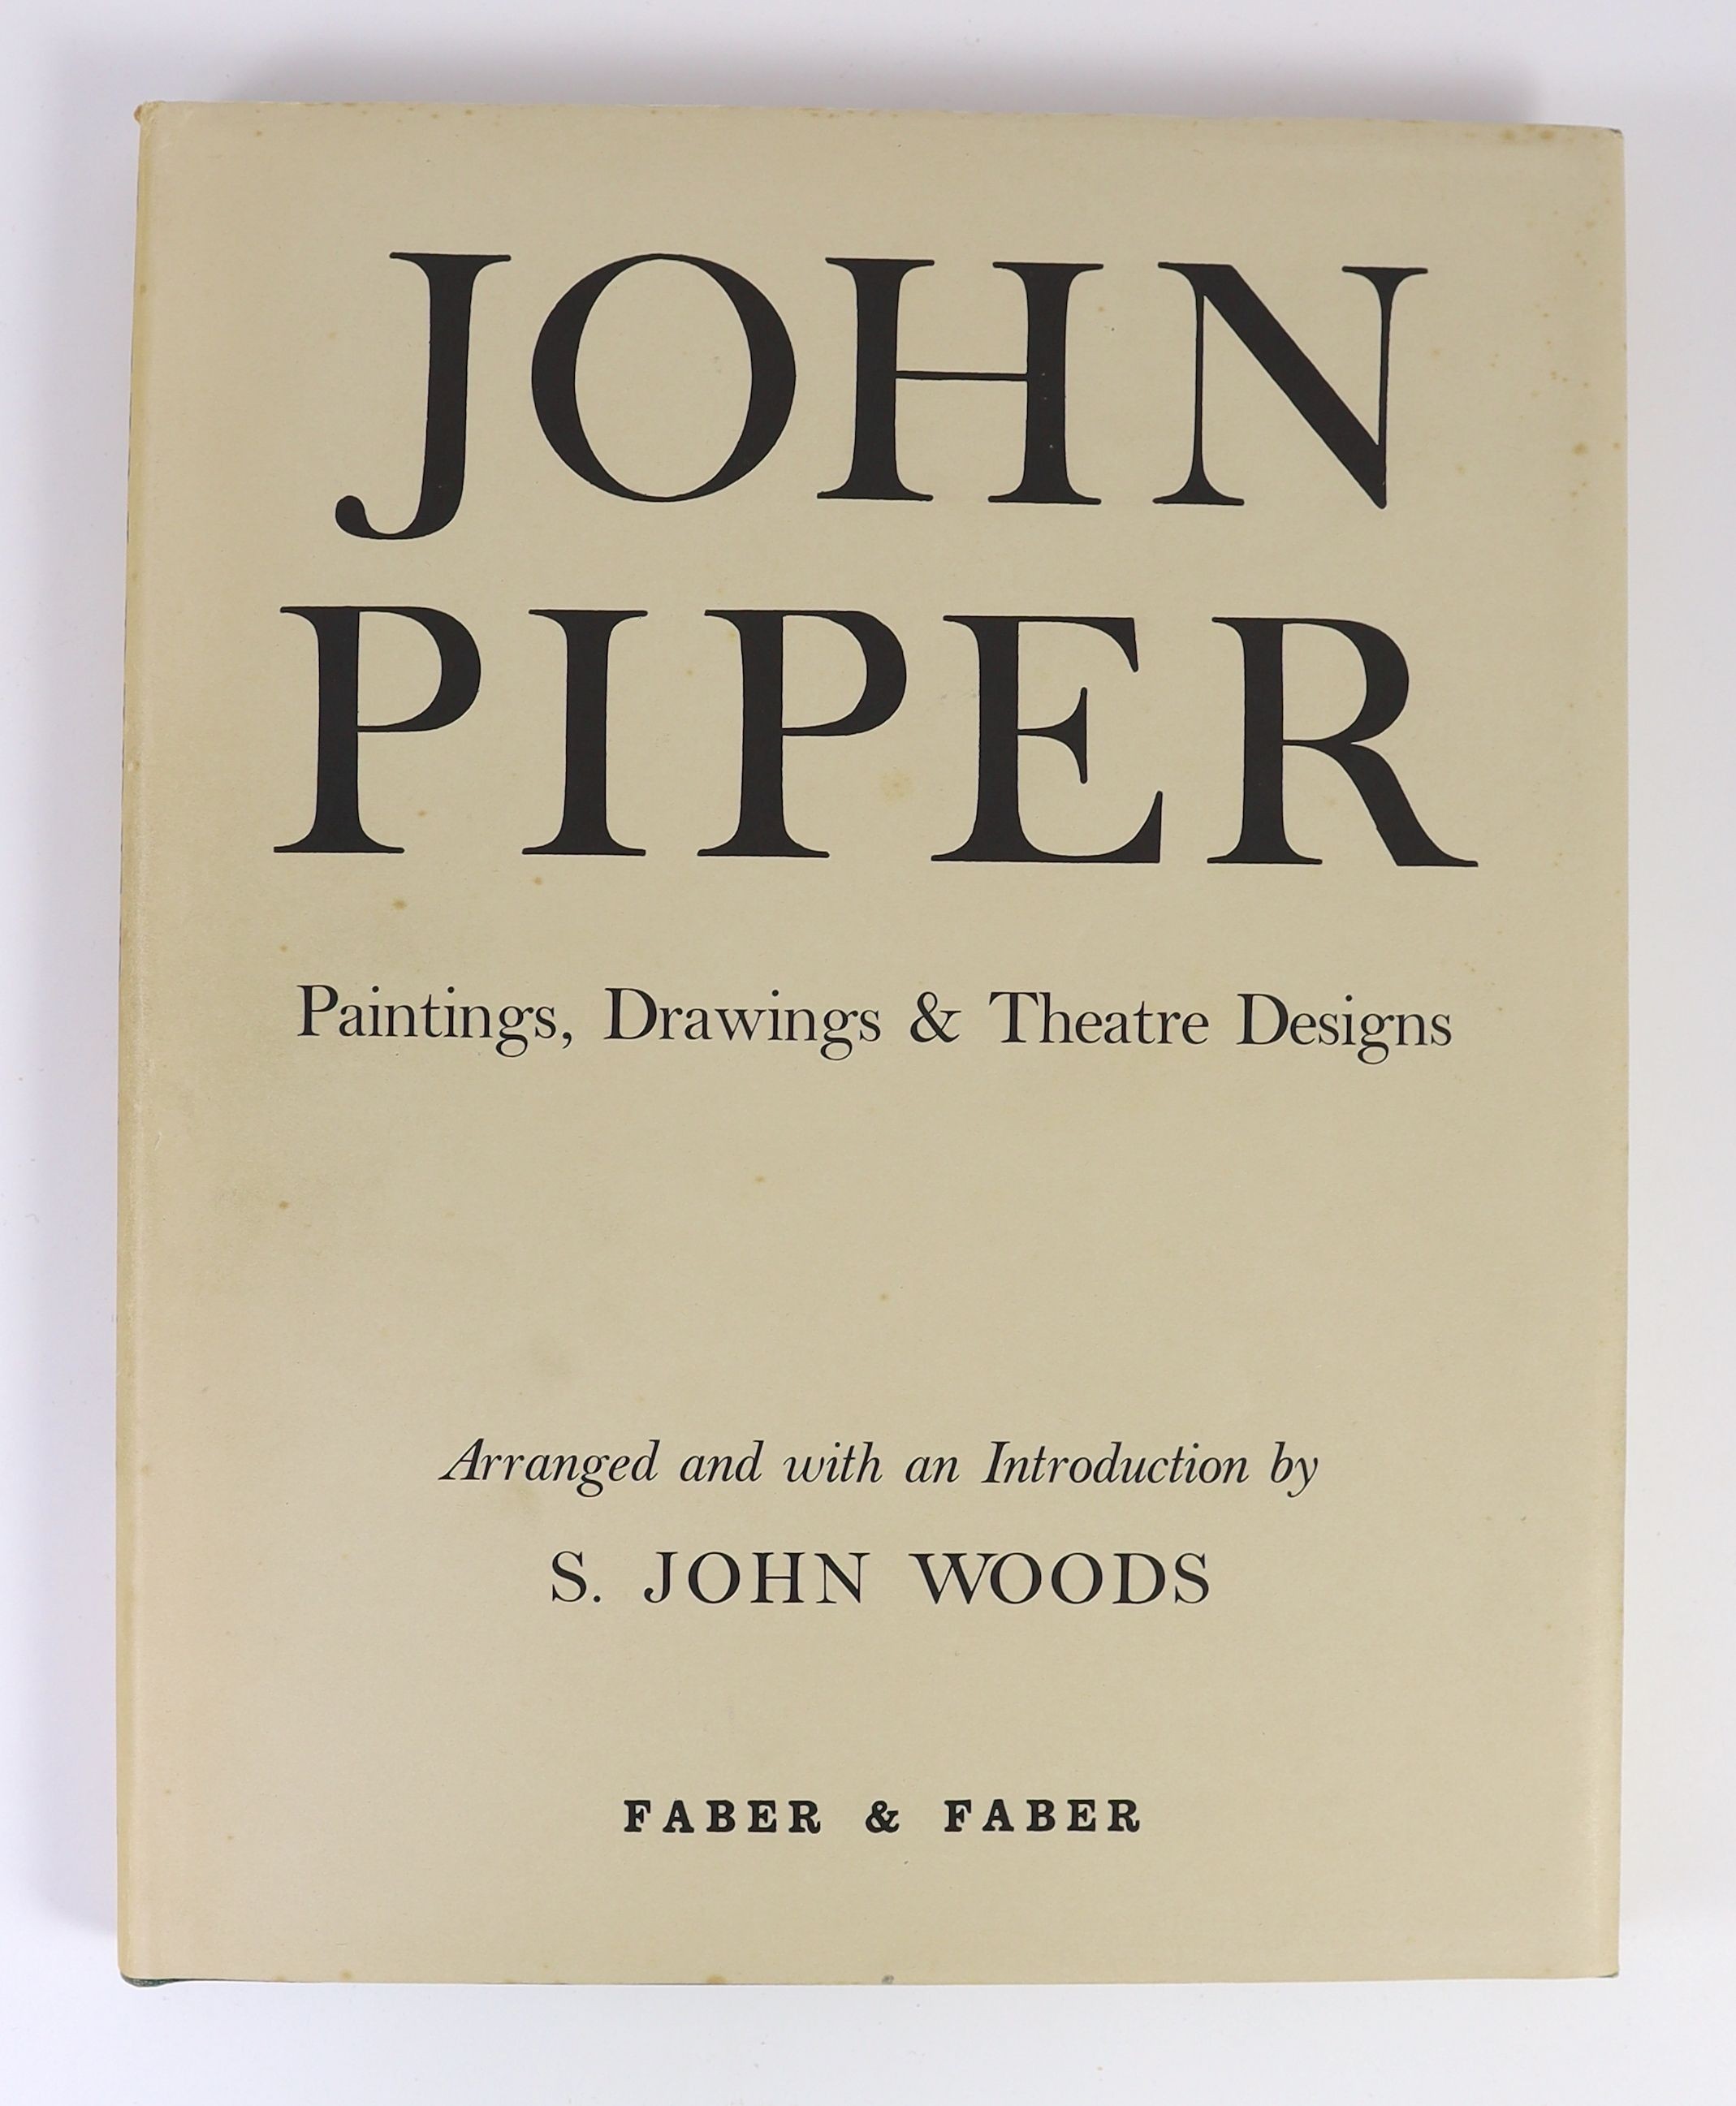 Piper, John - Paintings, Drawings & Theatre Designs, 1st edition, one of 50 with signed, hand-coloured aquatint frontispiece, 4to, green buckram gilt, with unclipped d/j, Faber & Faber, London, 1955, in slip case.